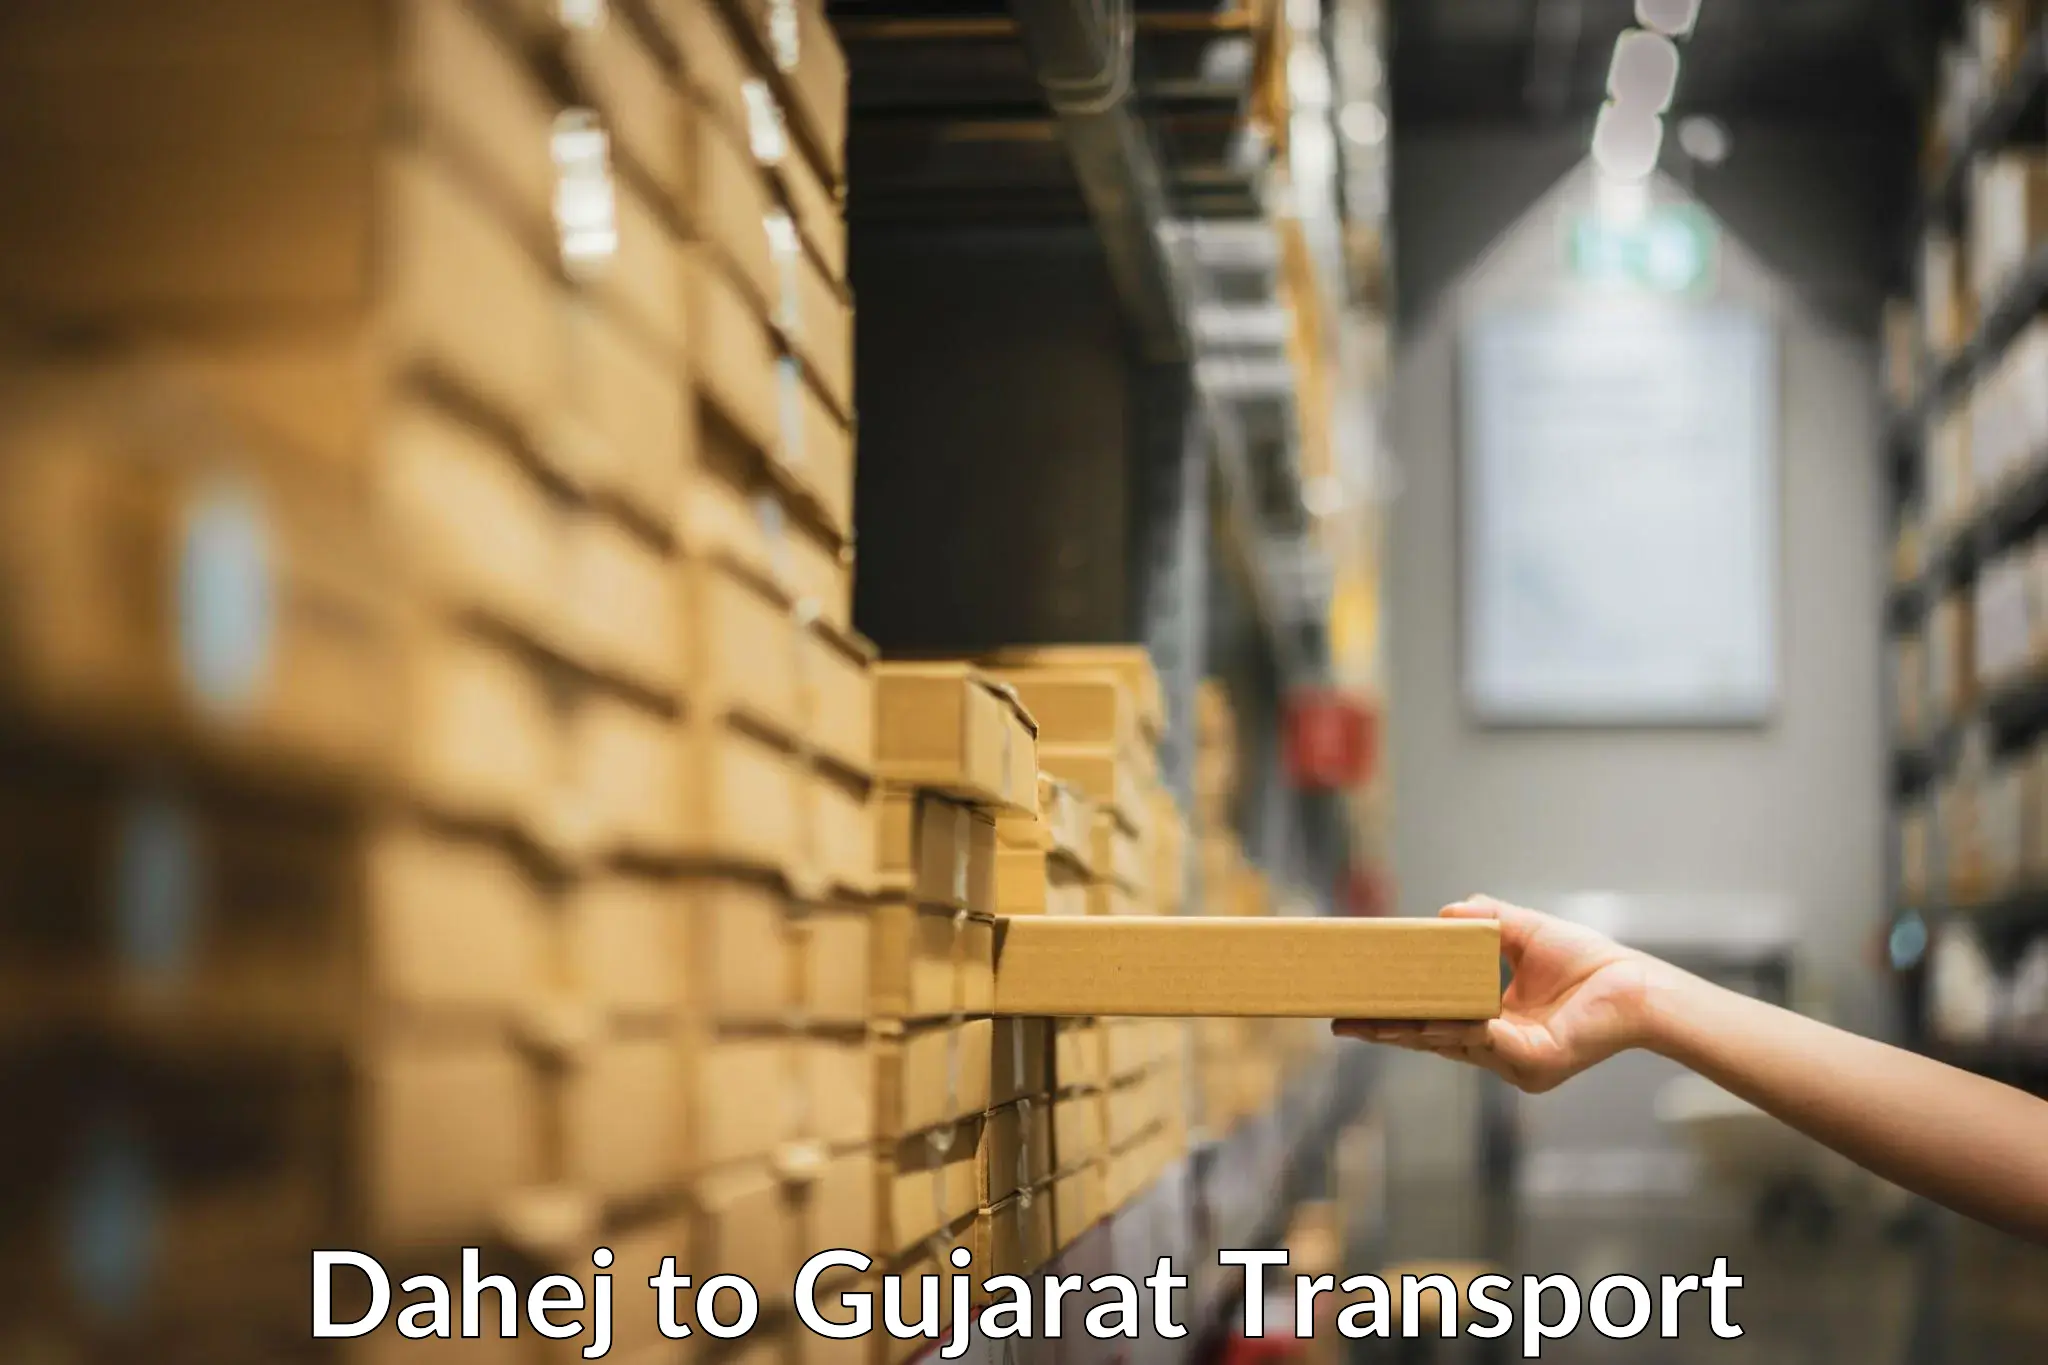 Container transport service Dahej to Dhanera